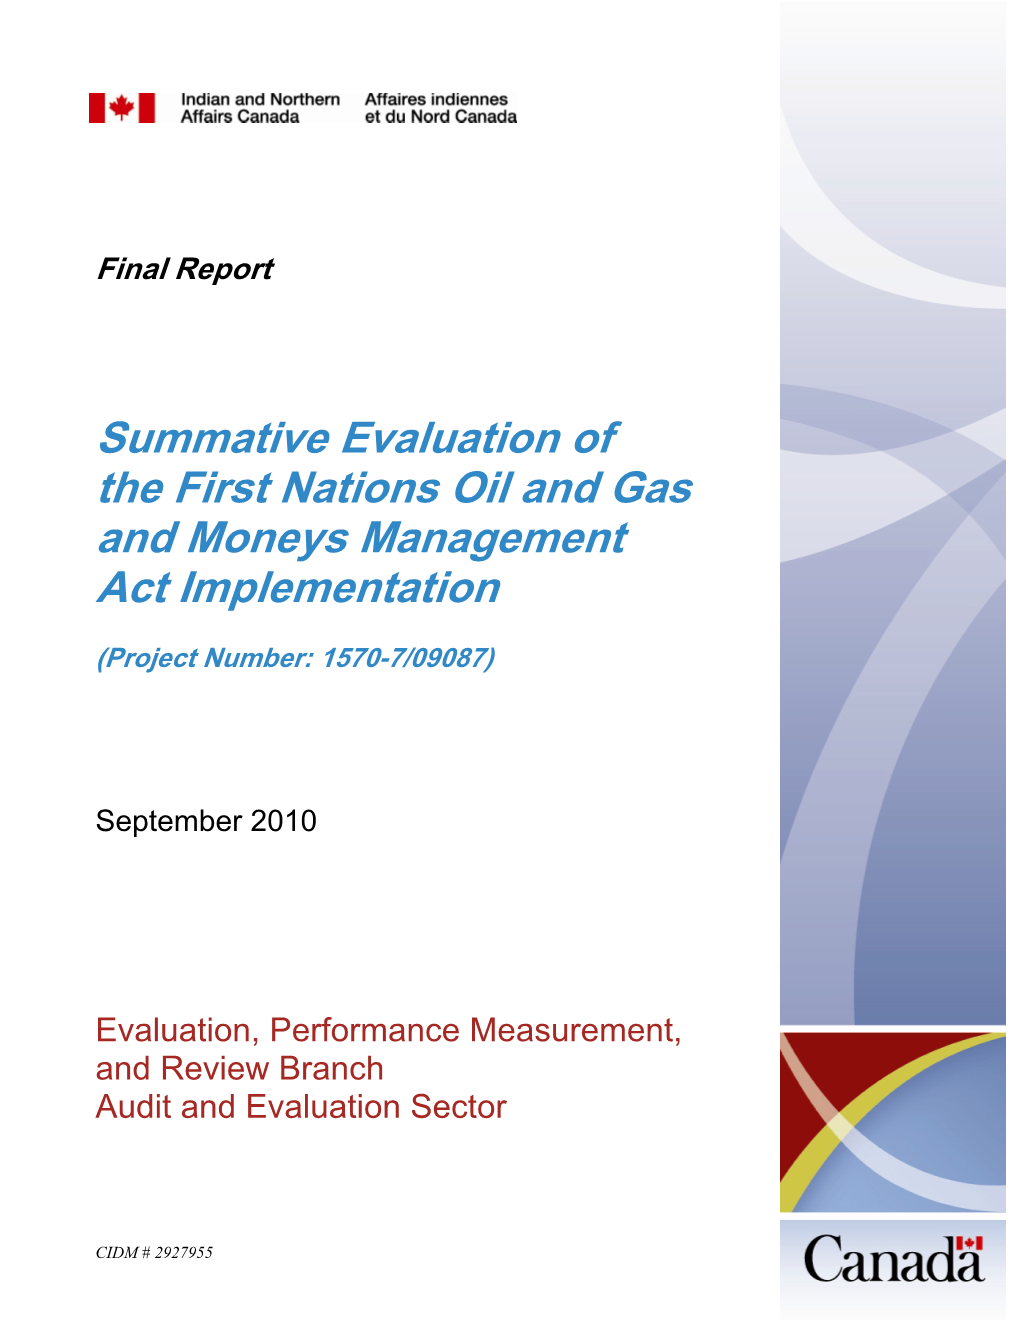 Summative Evaluation of the First Nations Oil and Gas and Moneys Management Act Implementation